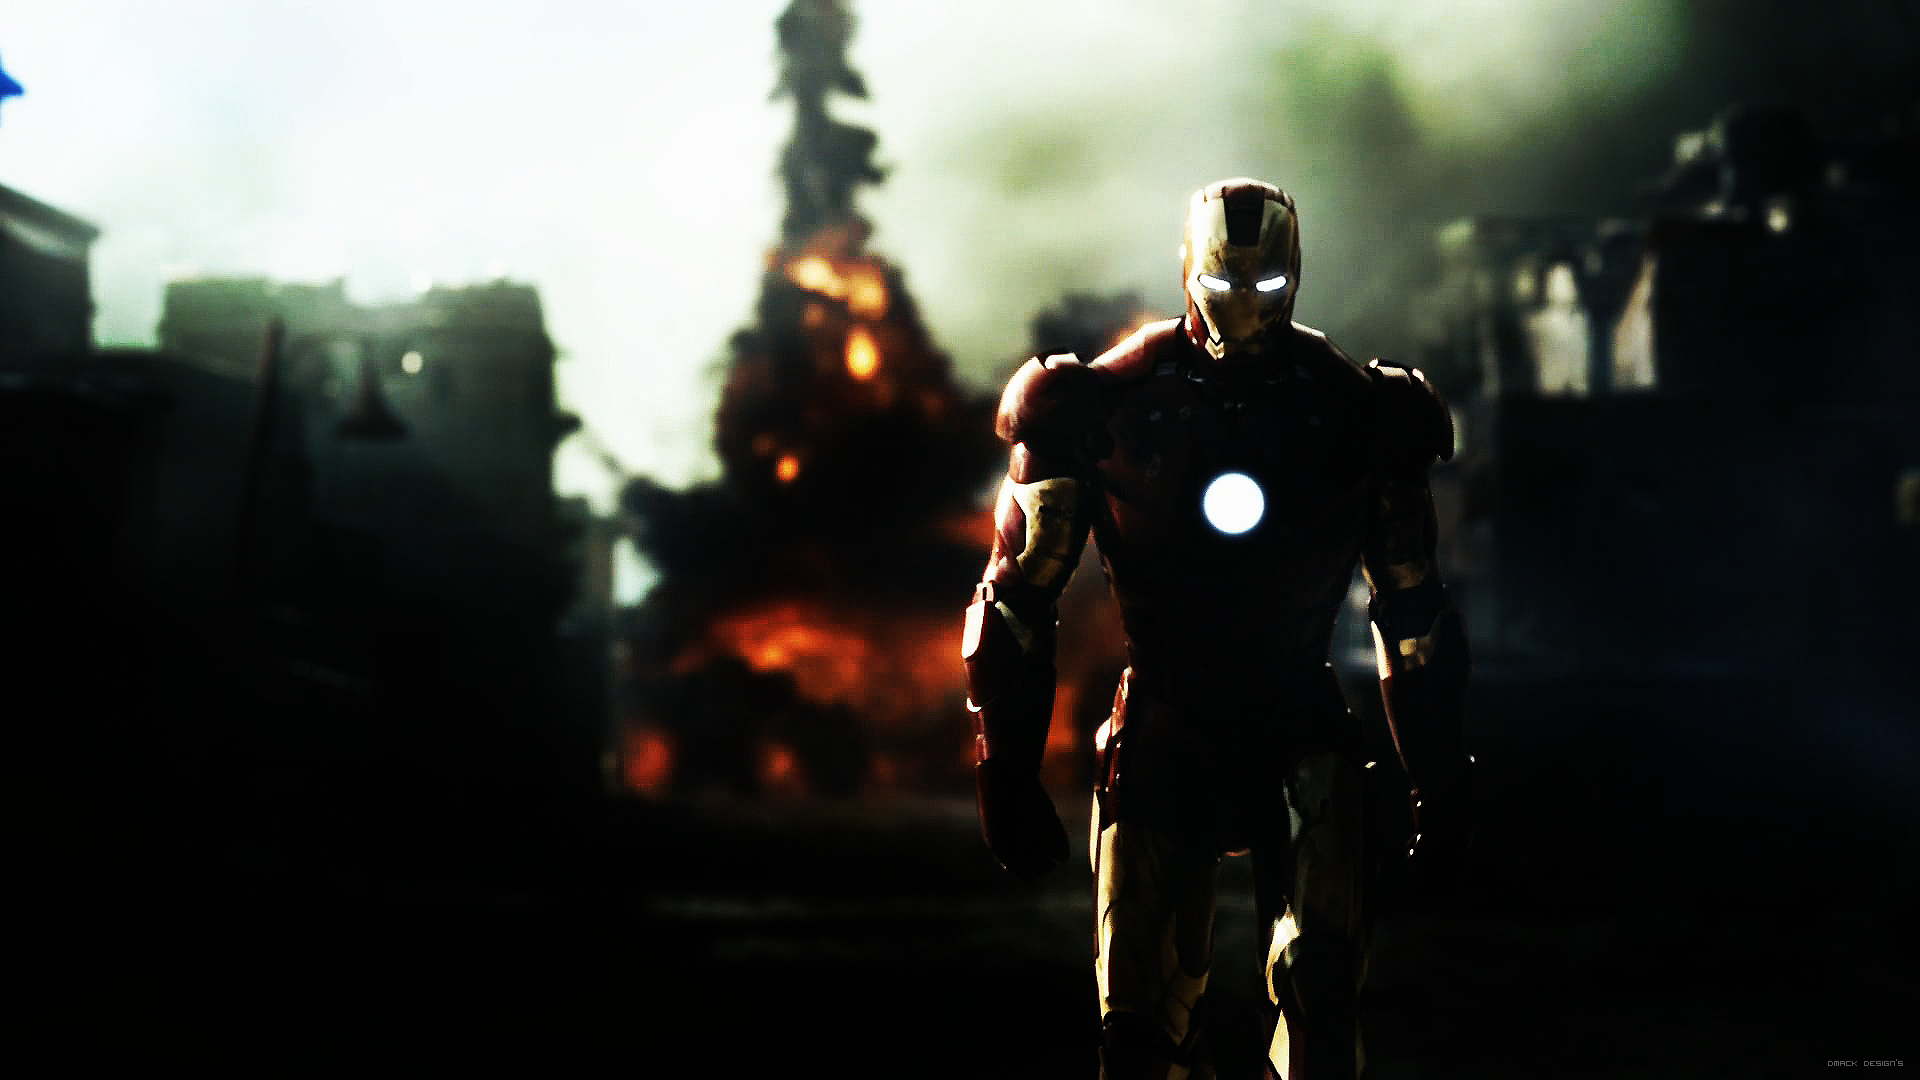 Iron Man Picture